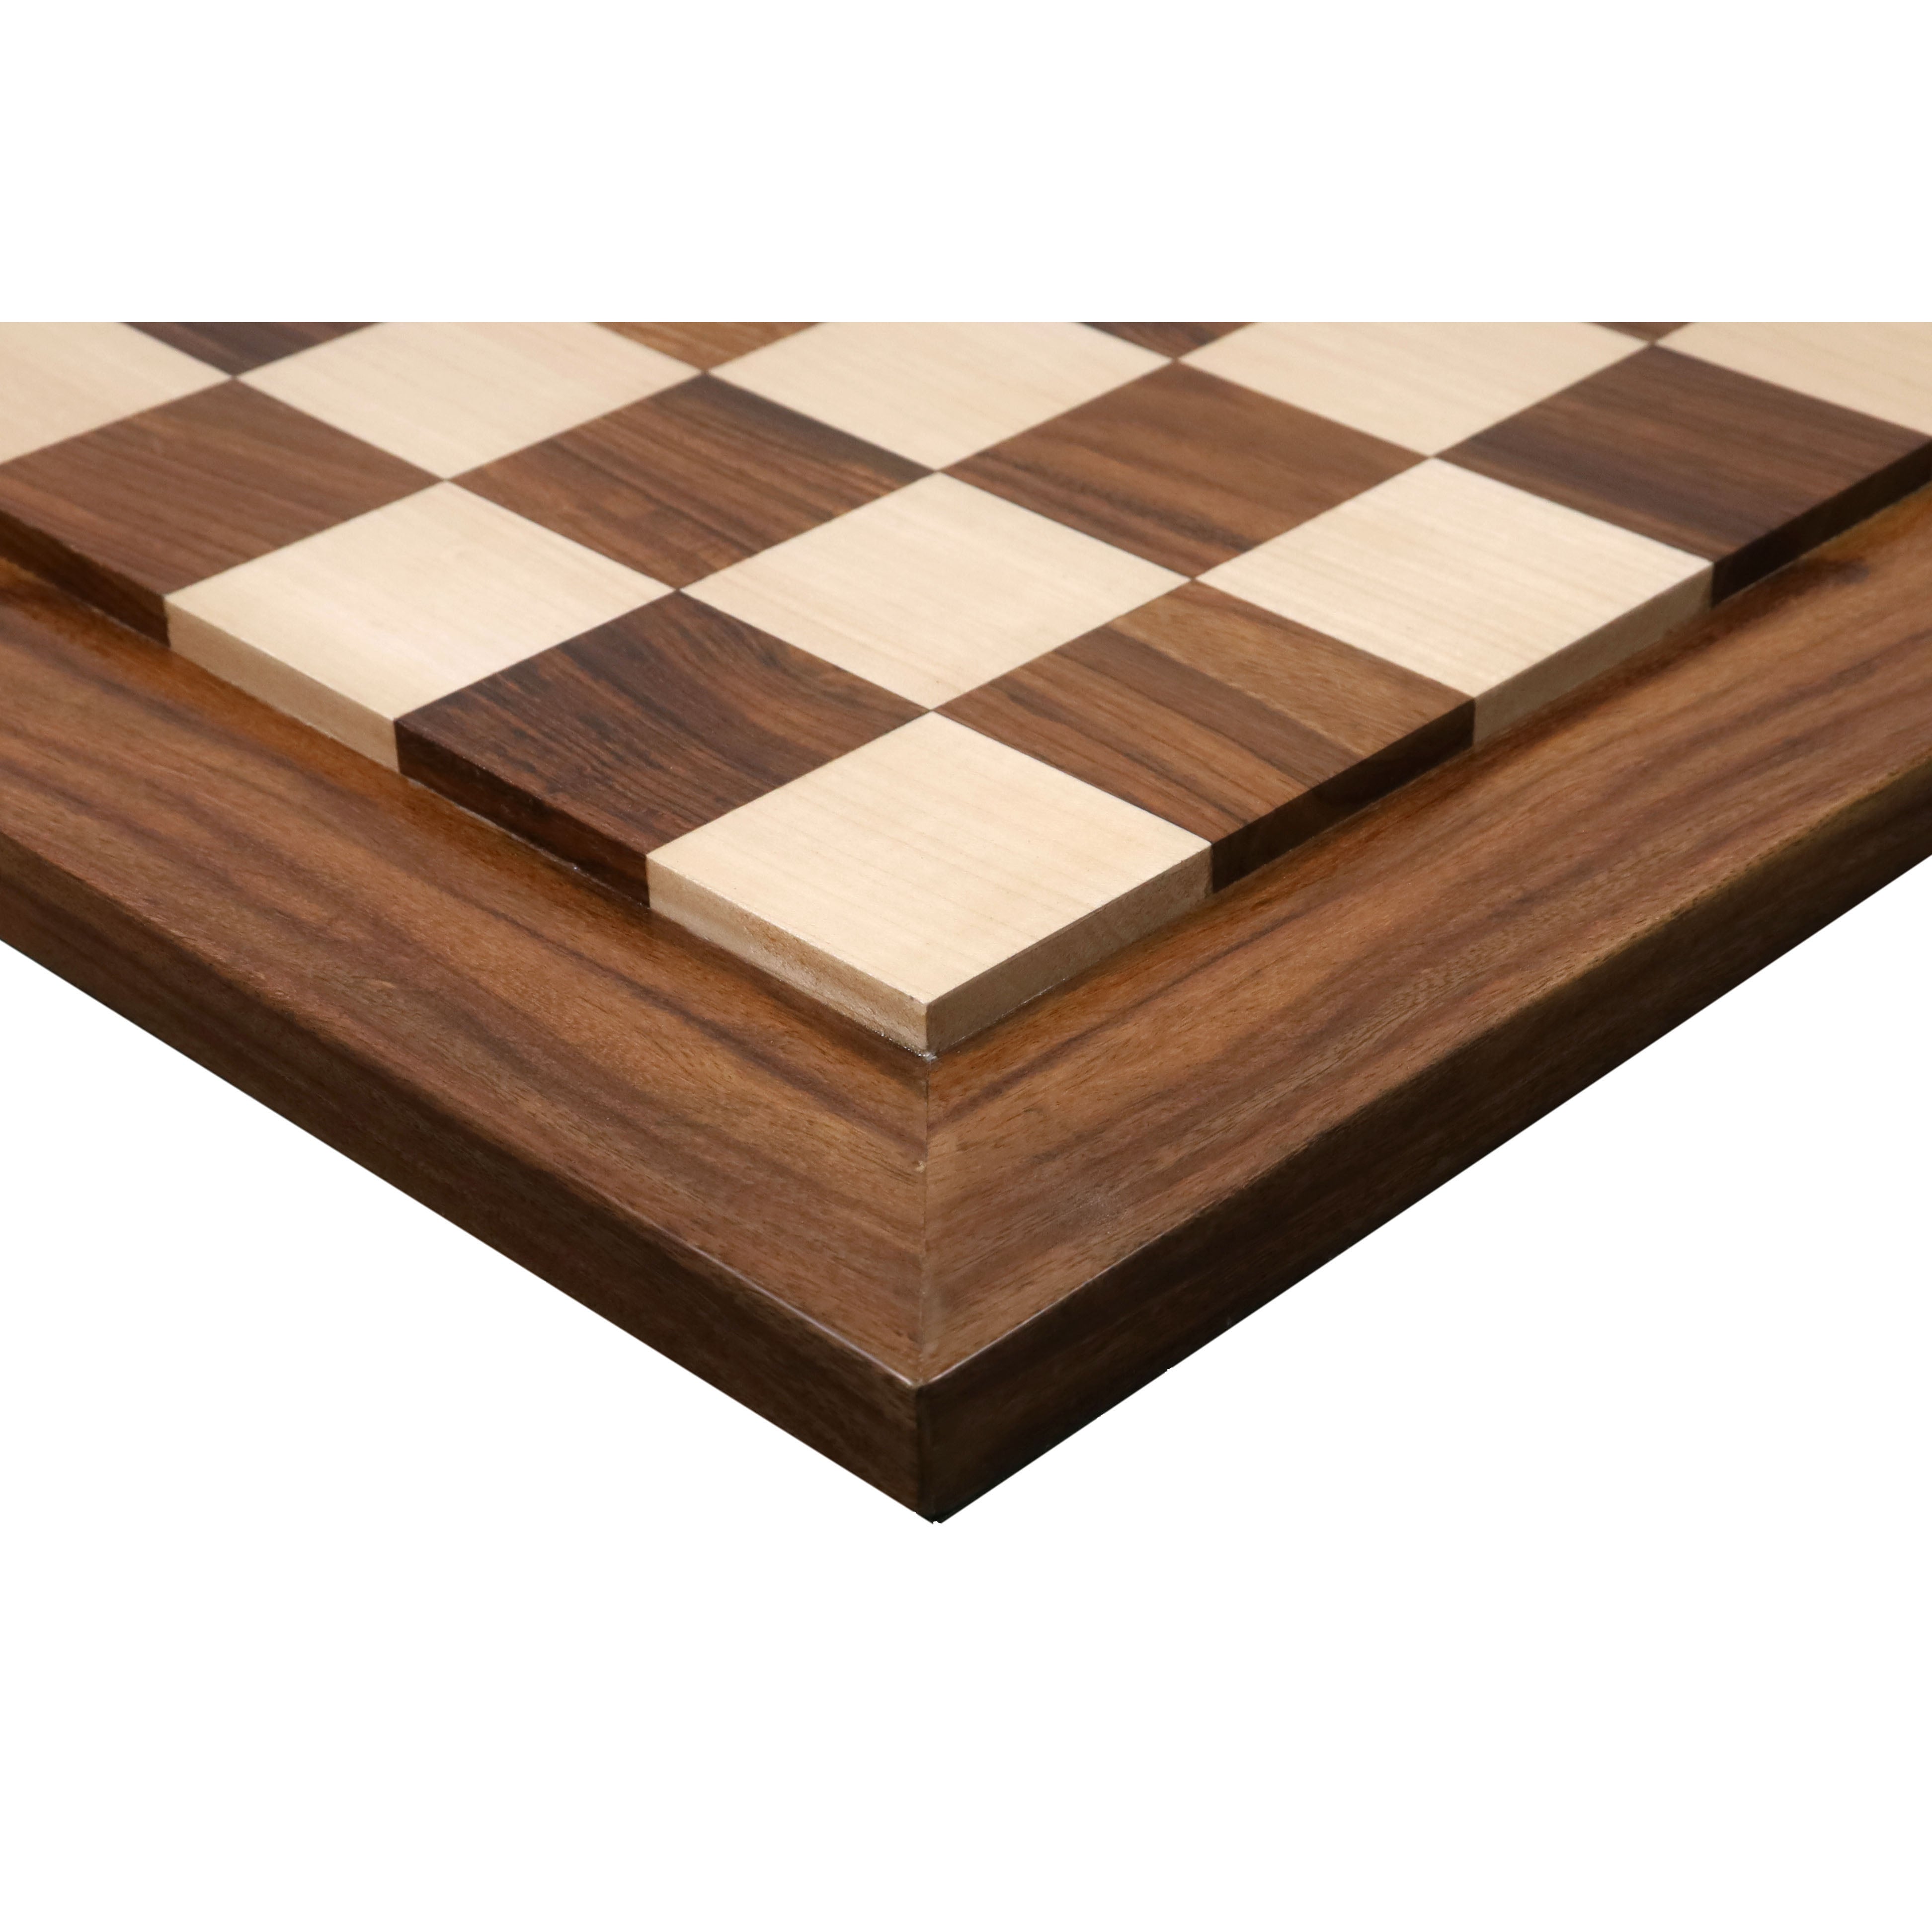 19 Luxury Solid Wood Chess Board With 2 Square 